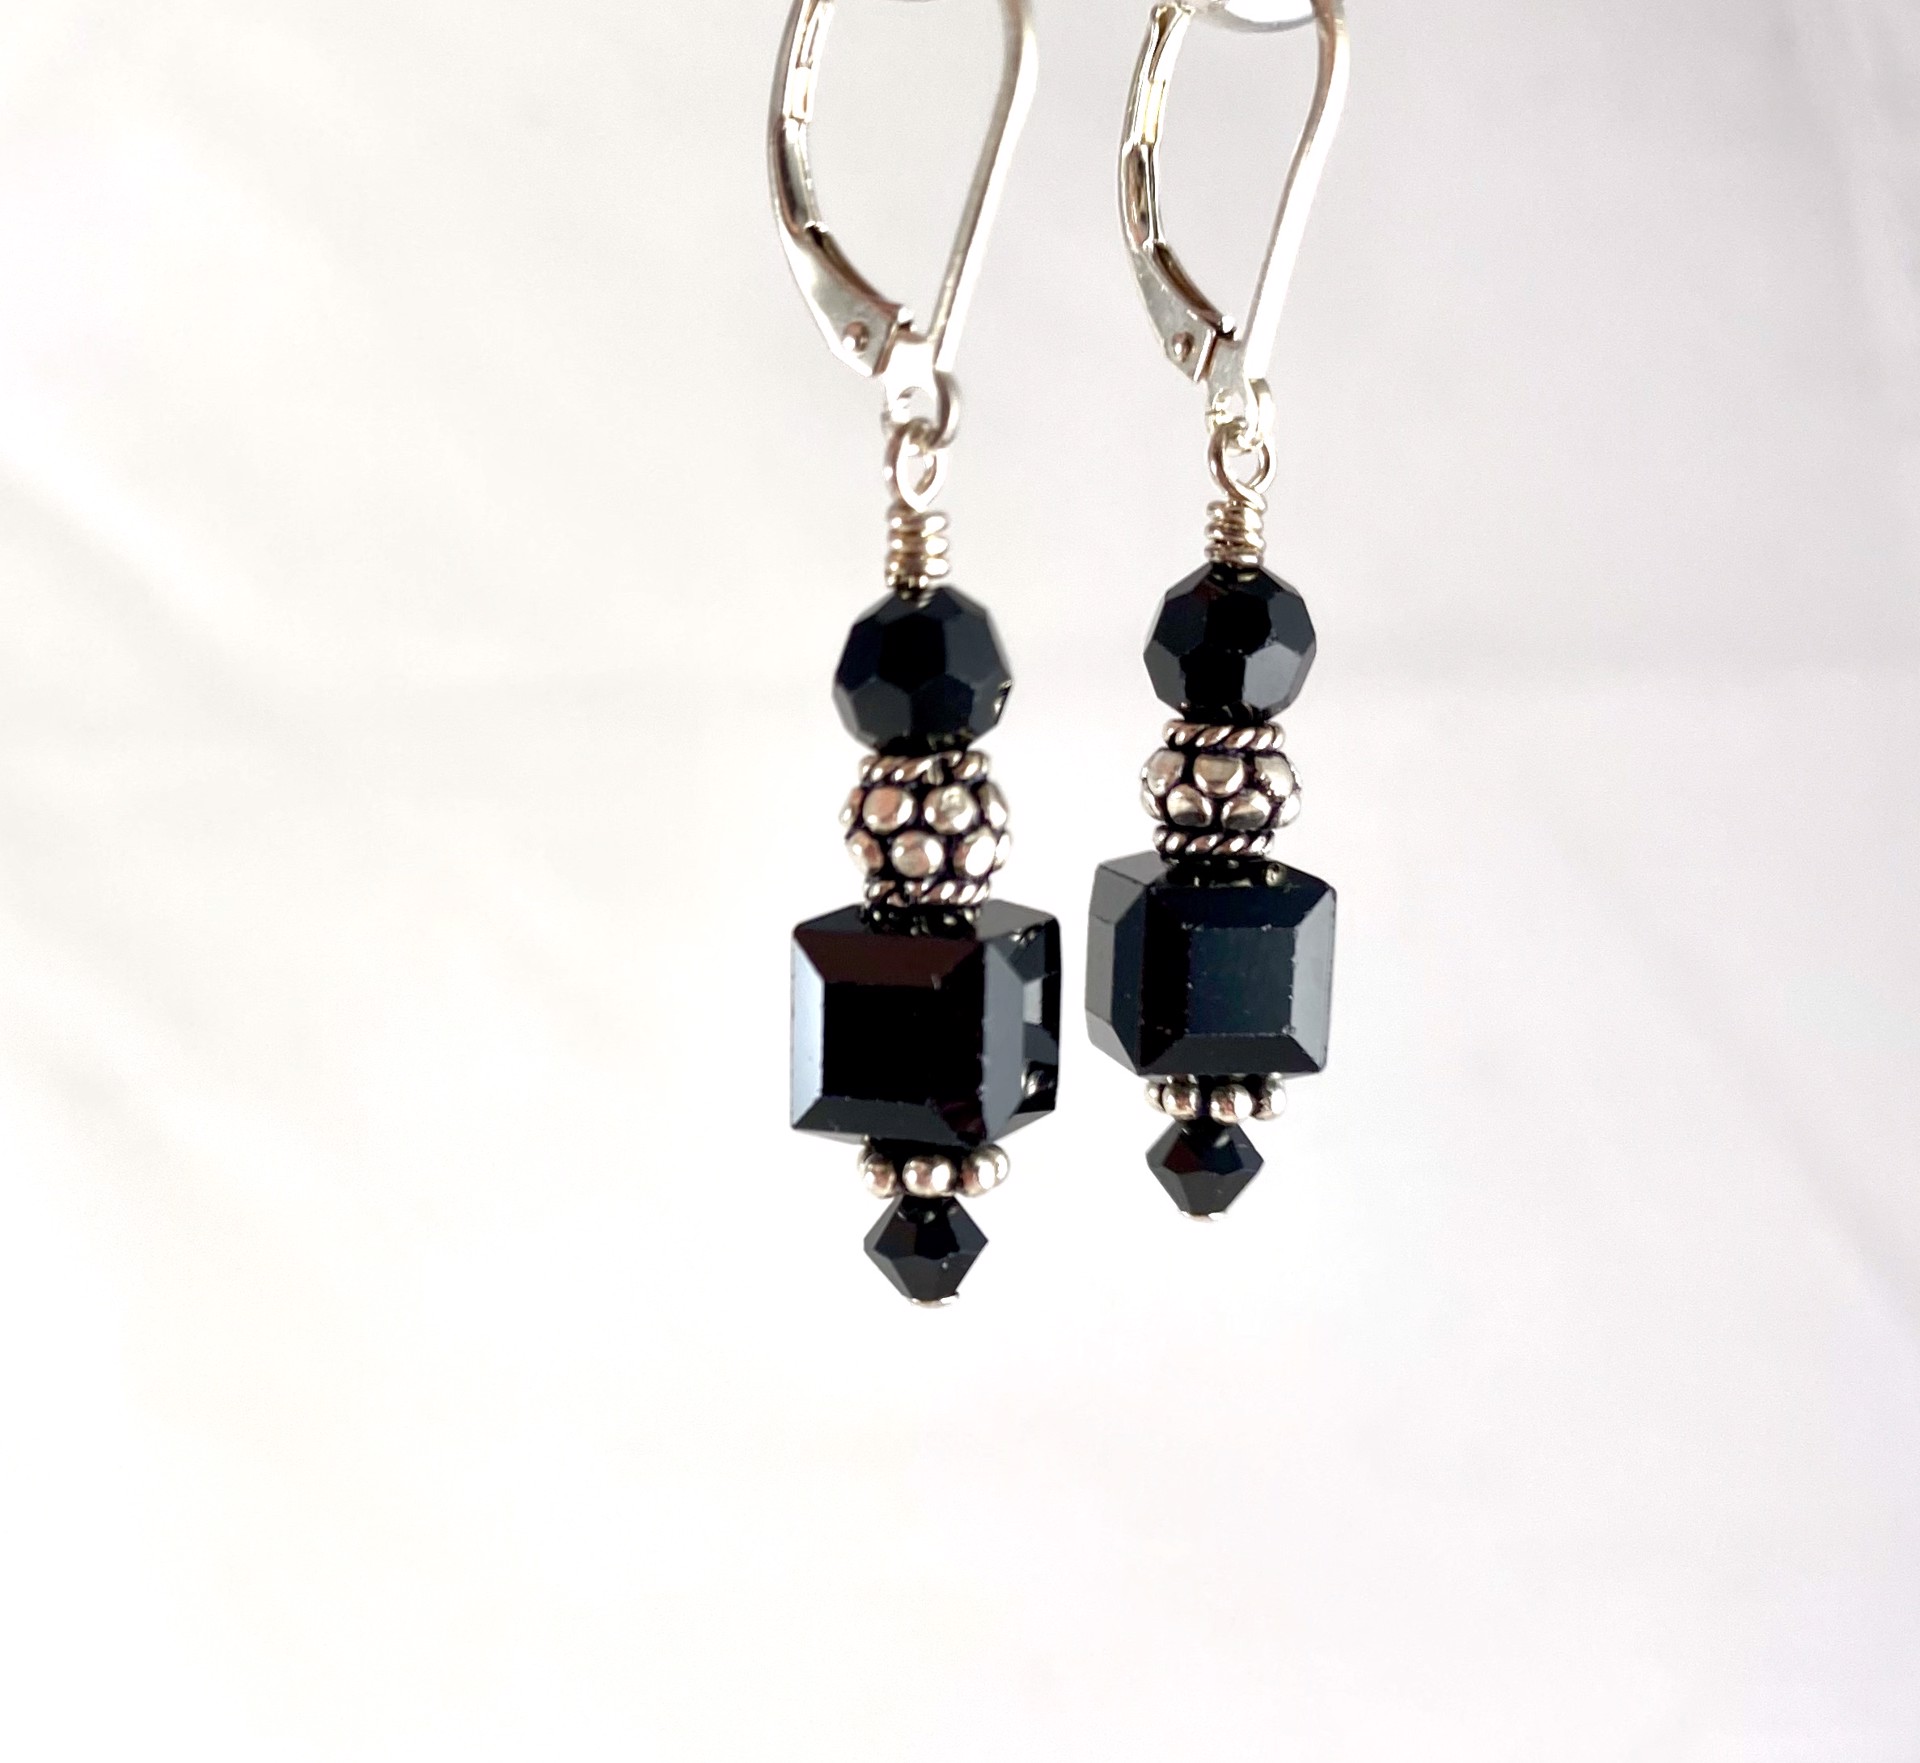 Faceted Onyx, Crystal Earrings SHOSH19-18 by Shoshannah Weinisch